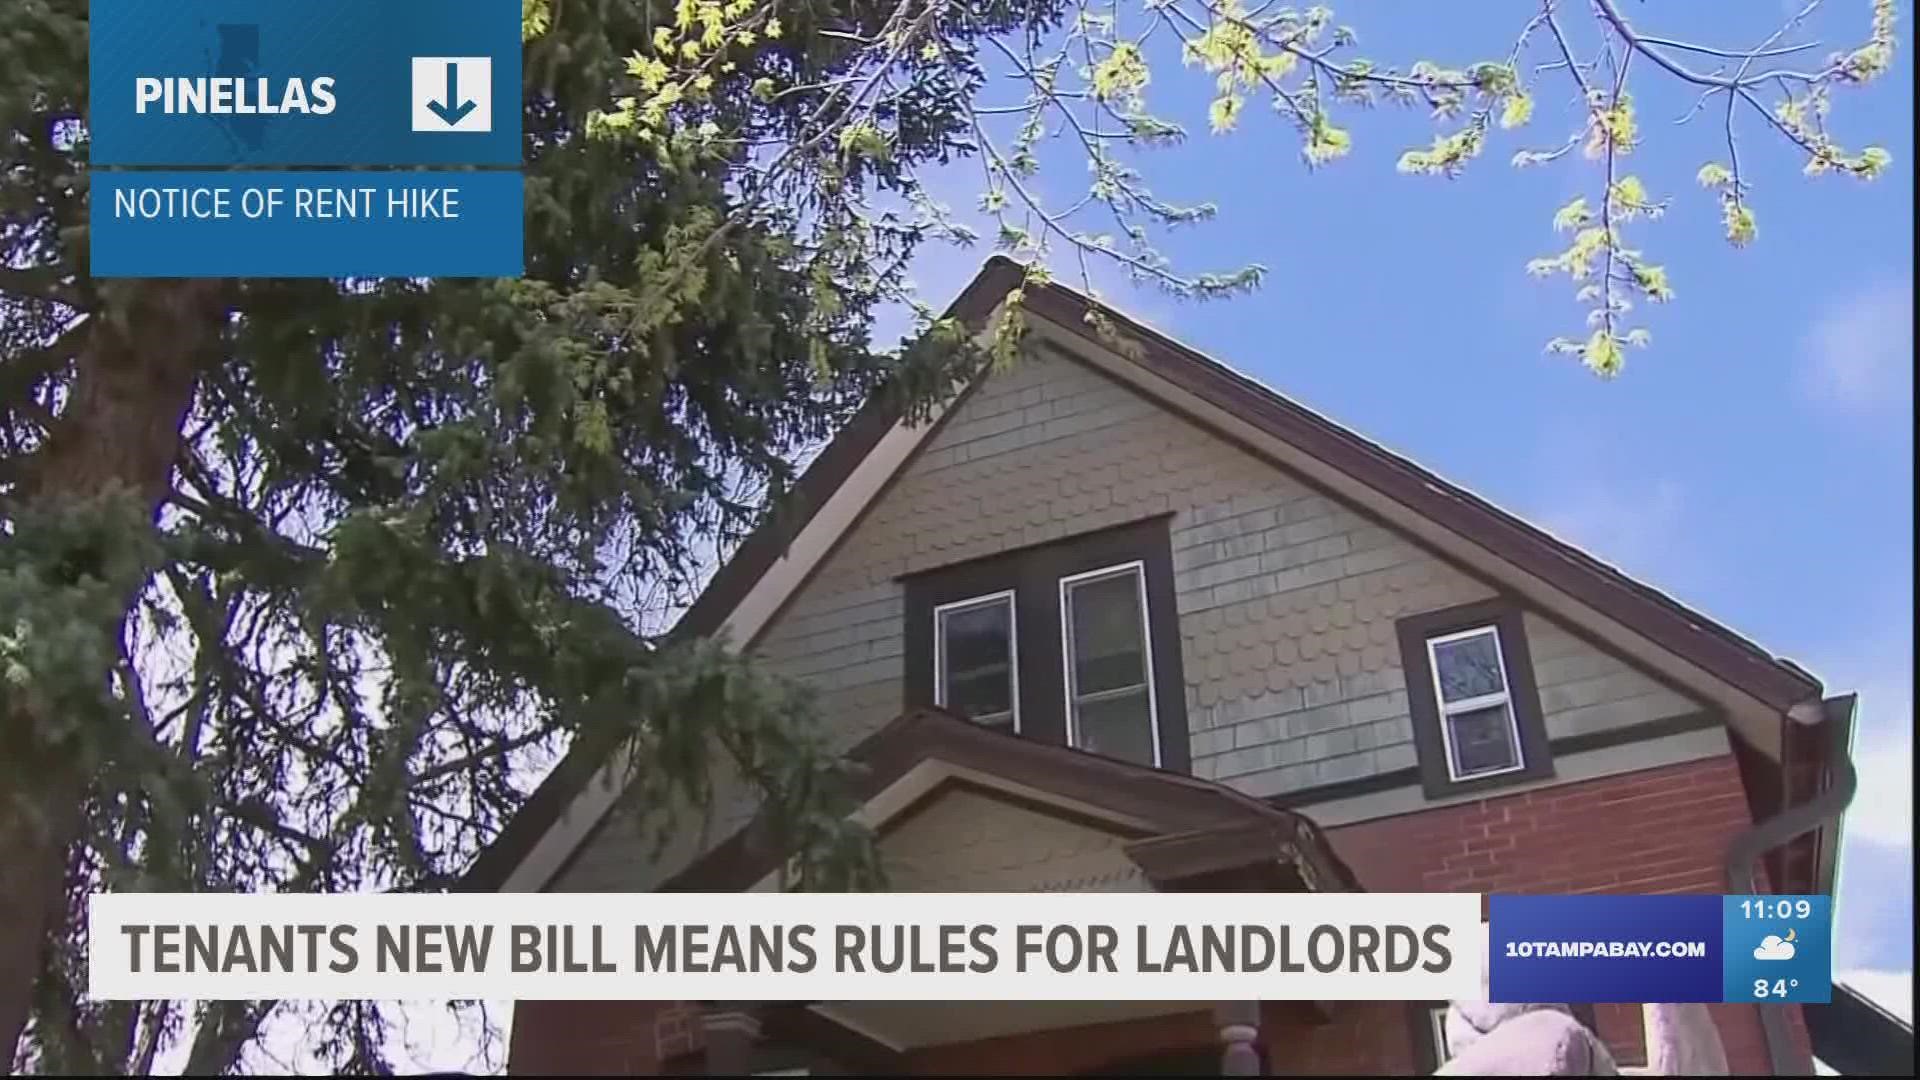 It sets requirements for landlords to notify renters about fees and rent hikes.